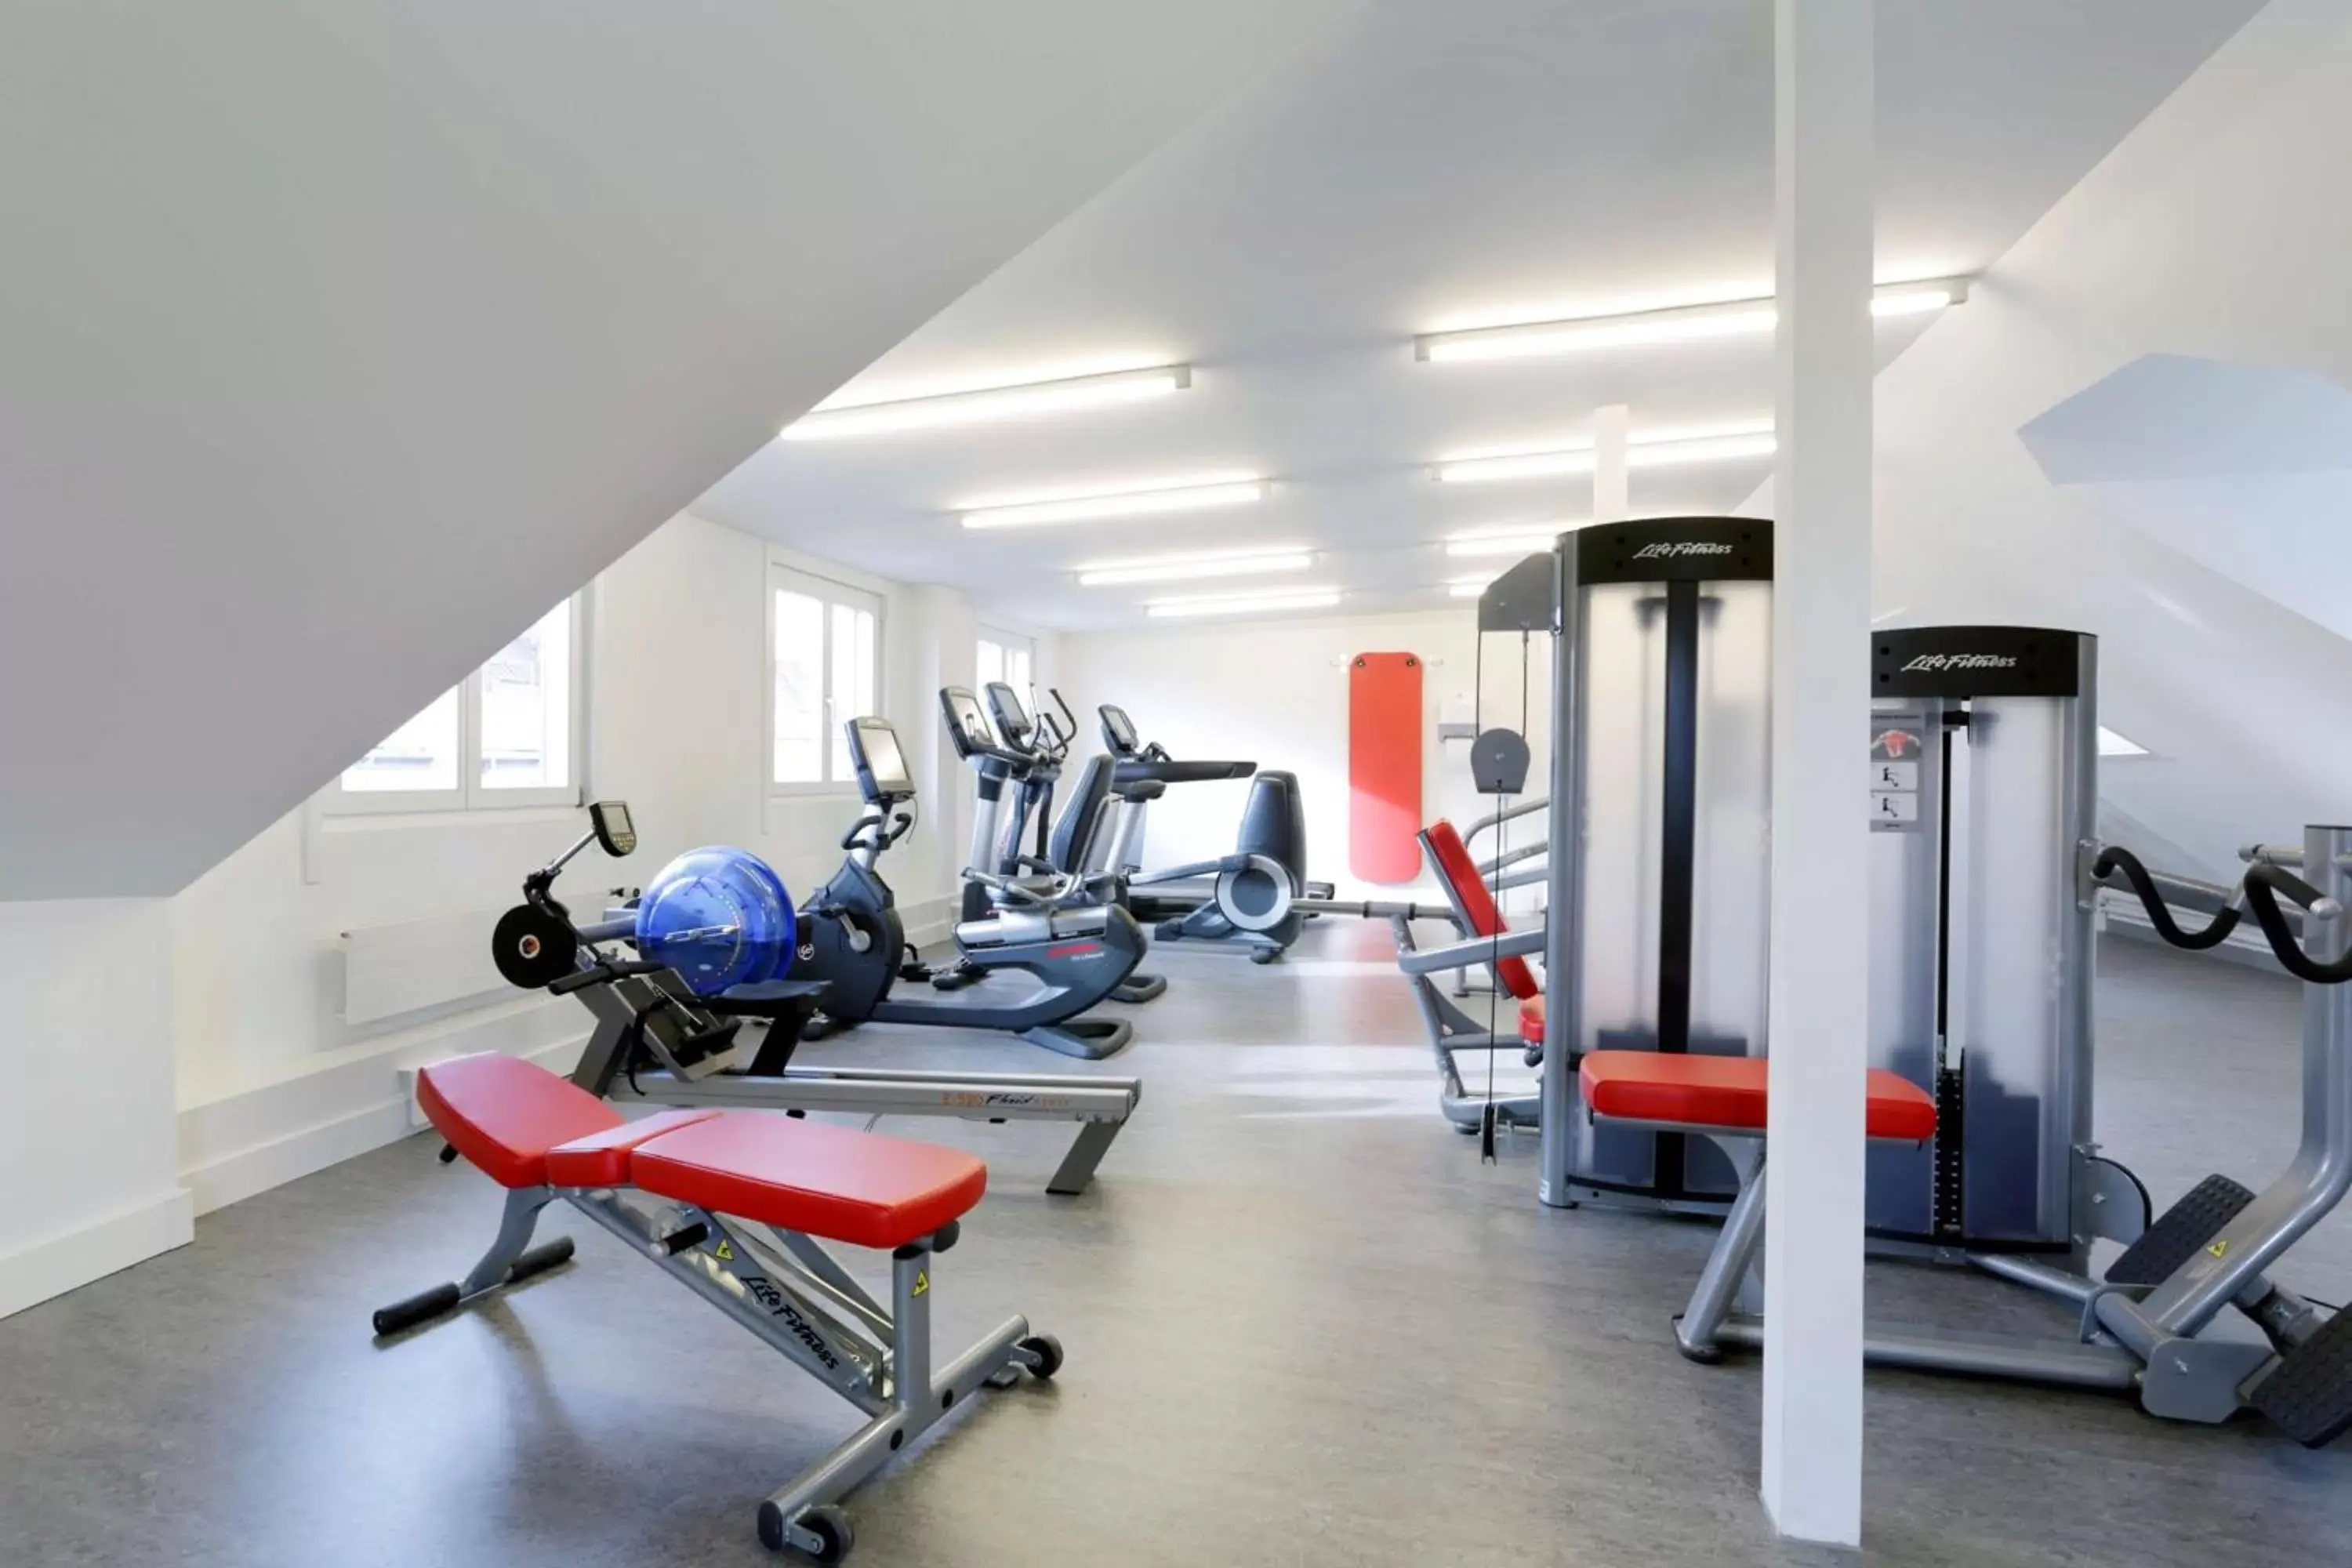 Fitness centre/facilities, Fitness Center/Facilities in Best Western Plus Hotel Bahnhof